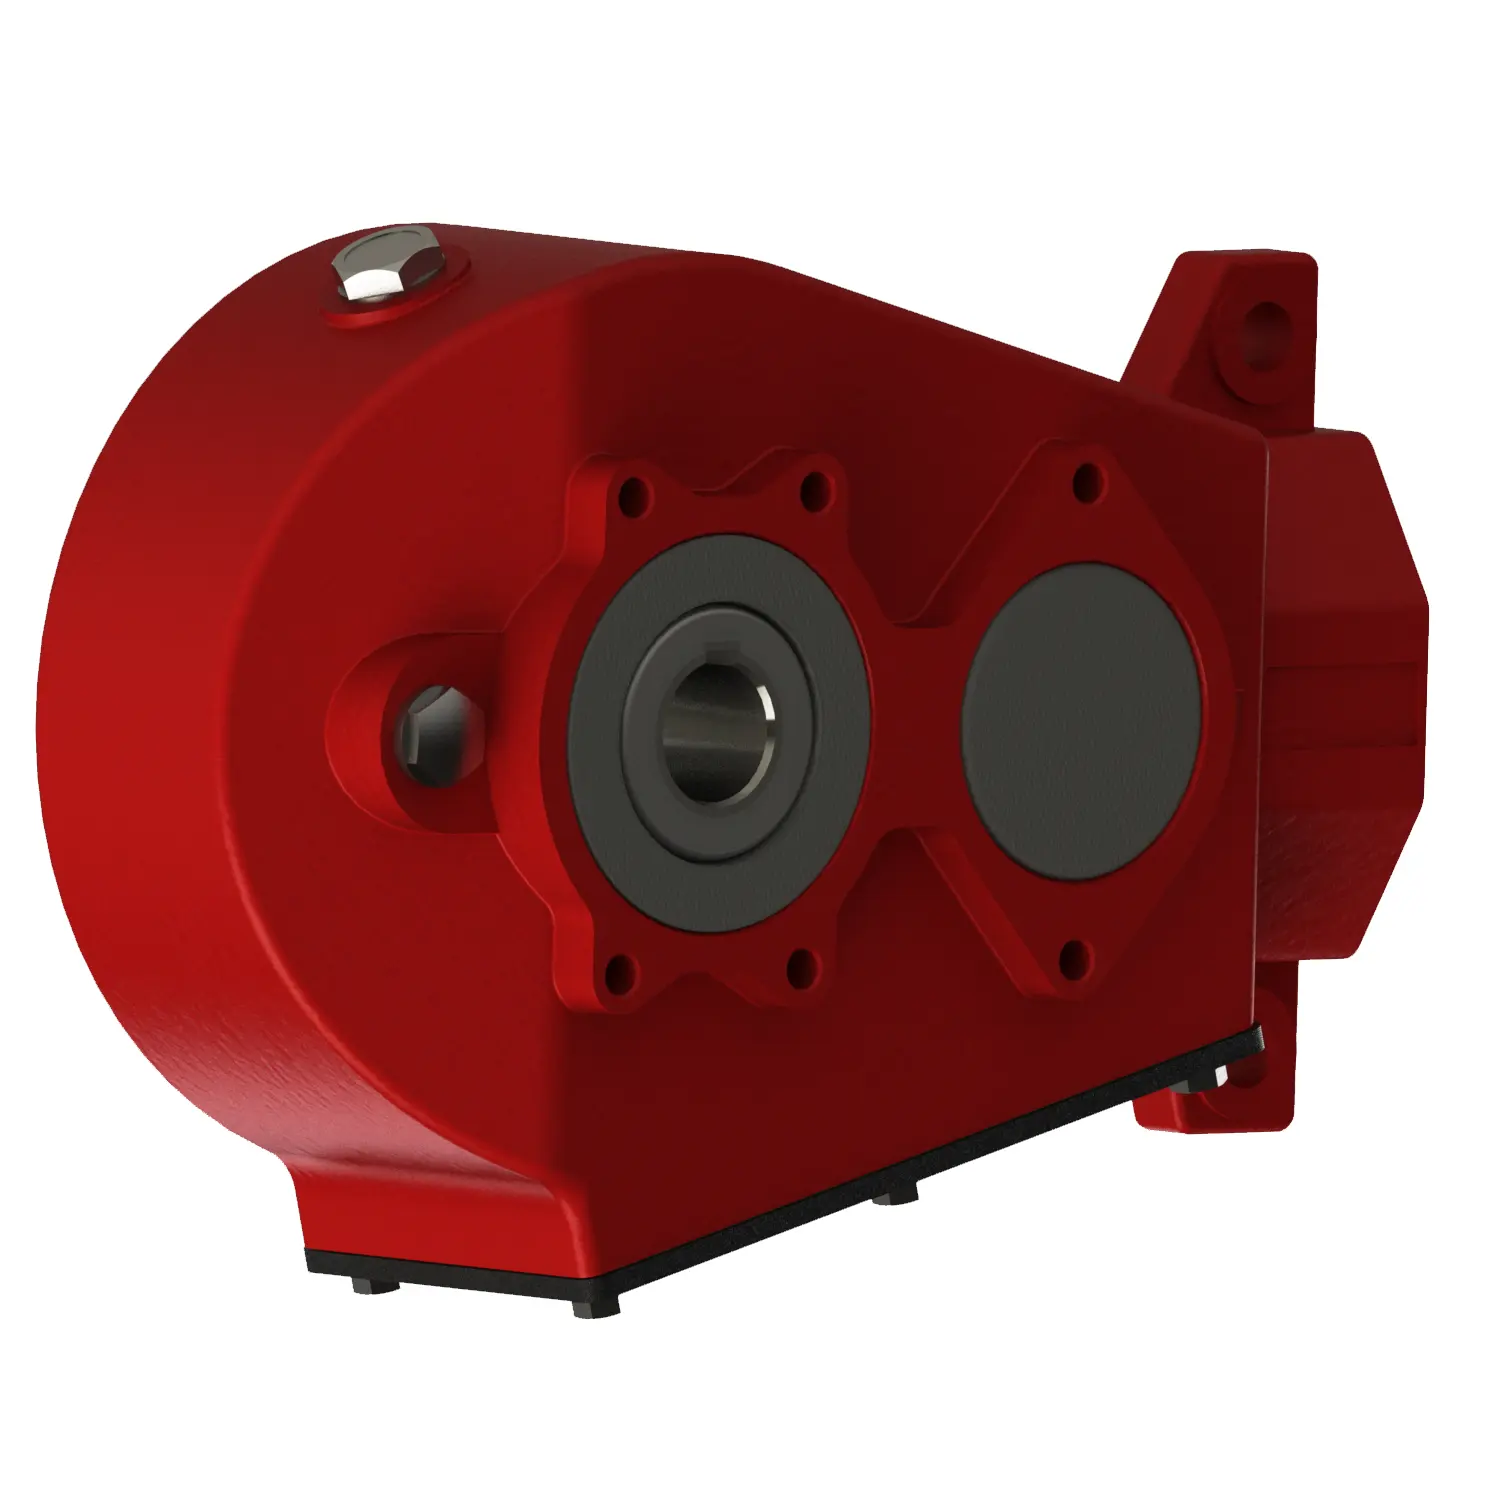 CMR Agricultural Hydraulic Motor Gearbox Speed Reducer Gear Box for Manure Spreading Machine